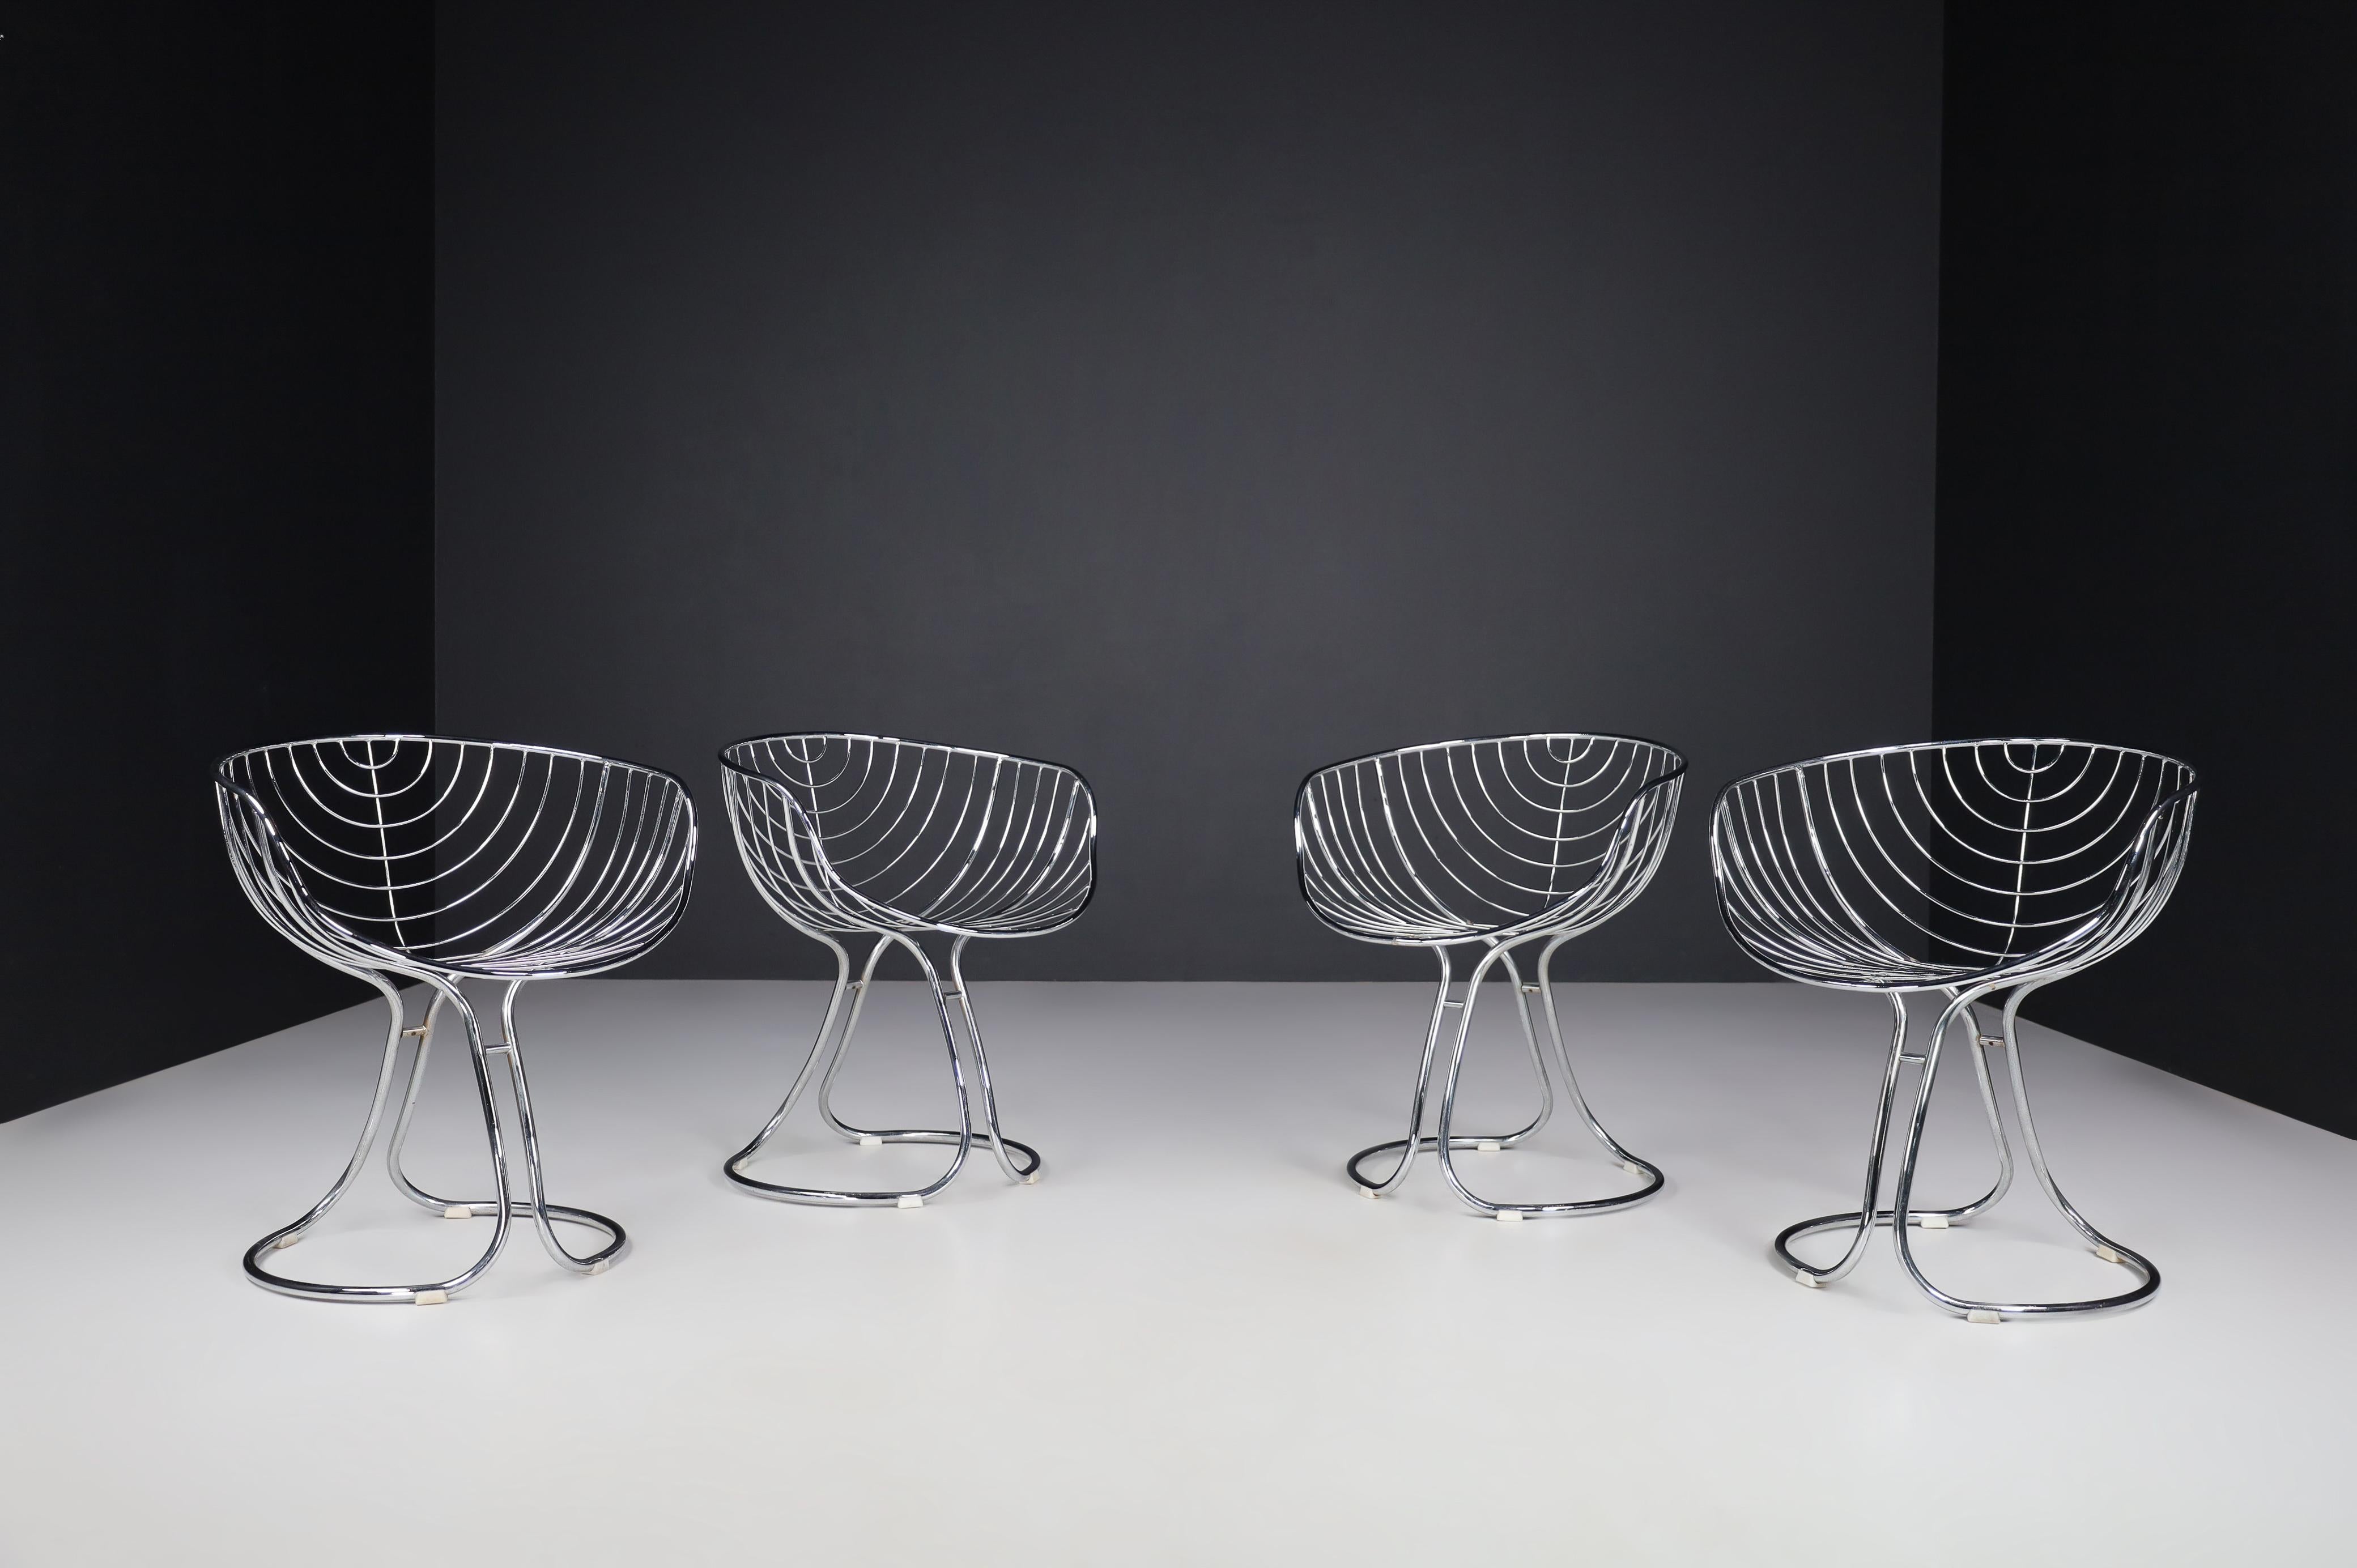 Gastone Rinaldi pan Am chairs for Rima Padova, Italy 1970s

This set of four chairs, model 